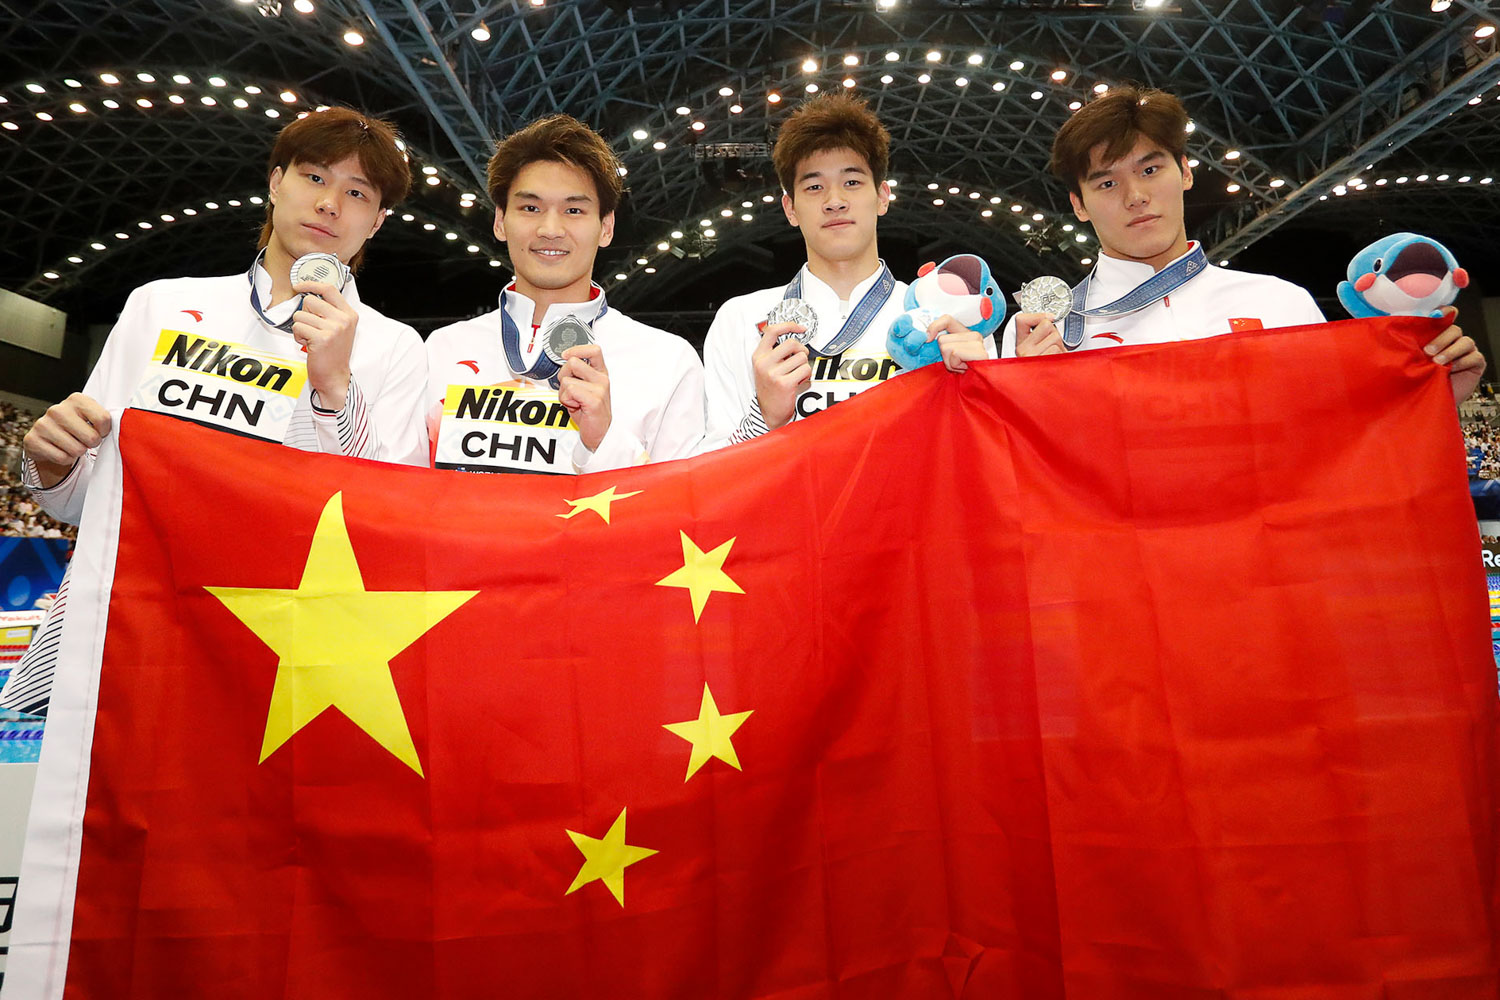 Pan Zhanle Shatters World Record in Leading China’s 4×100 Freestyle Relay with a Time of 46.80